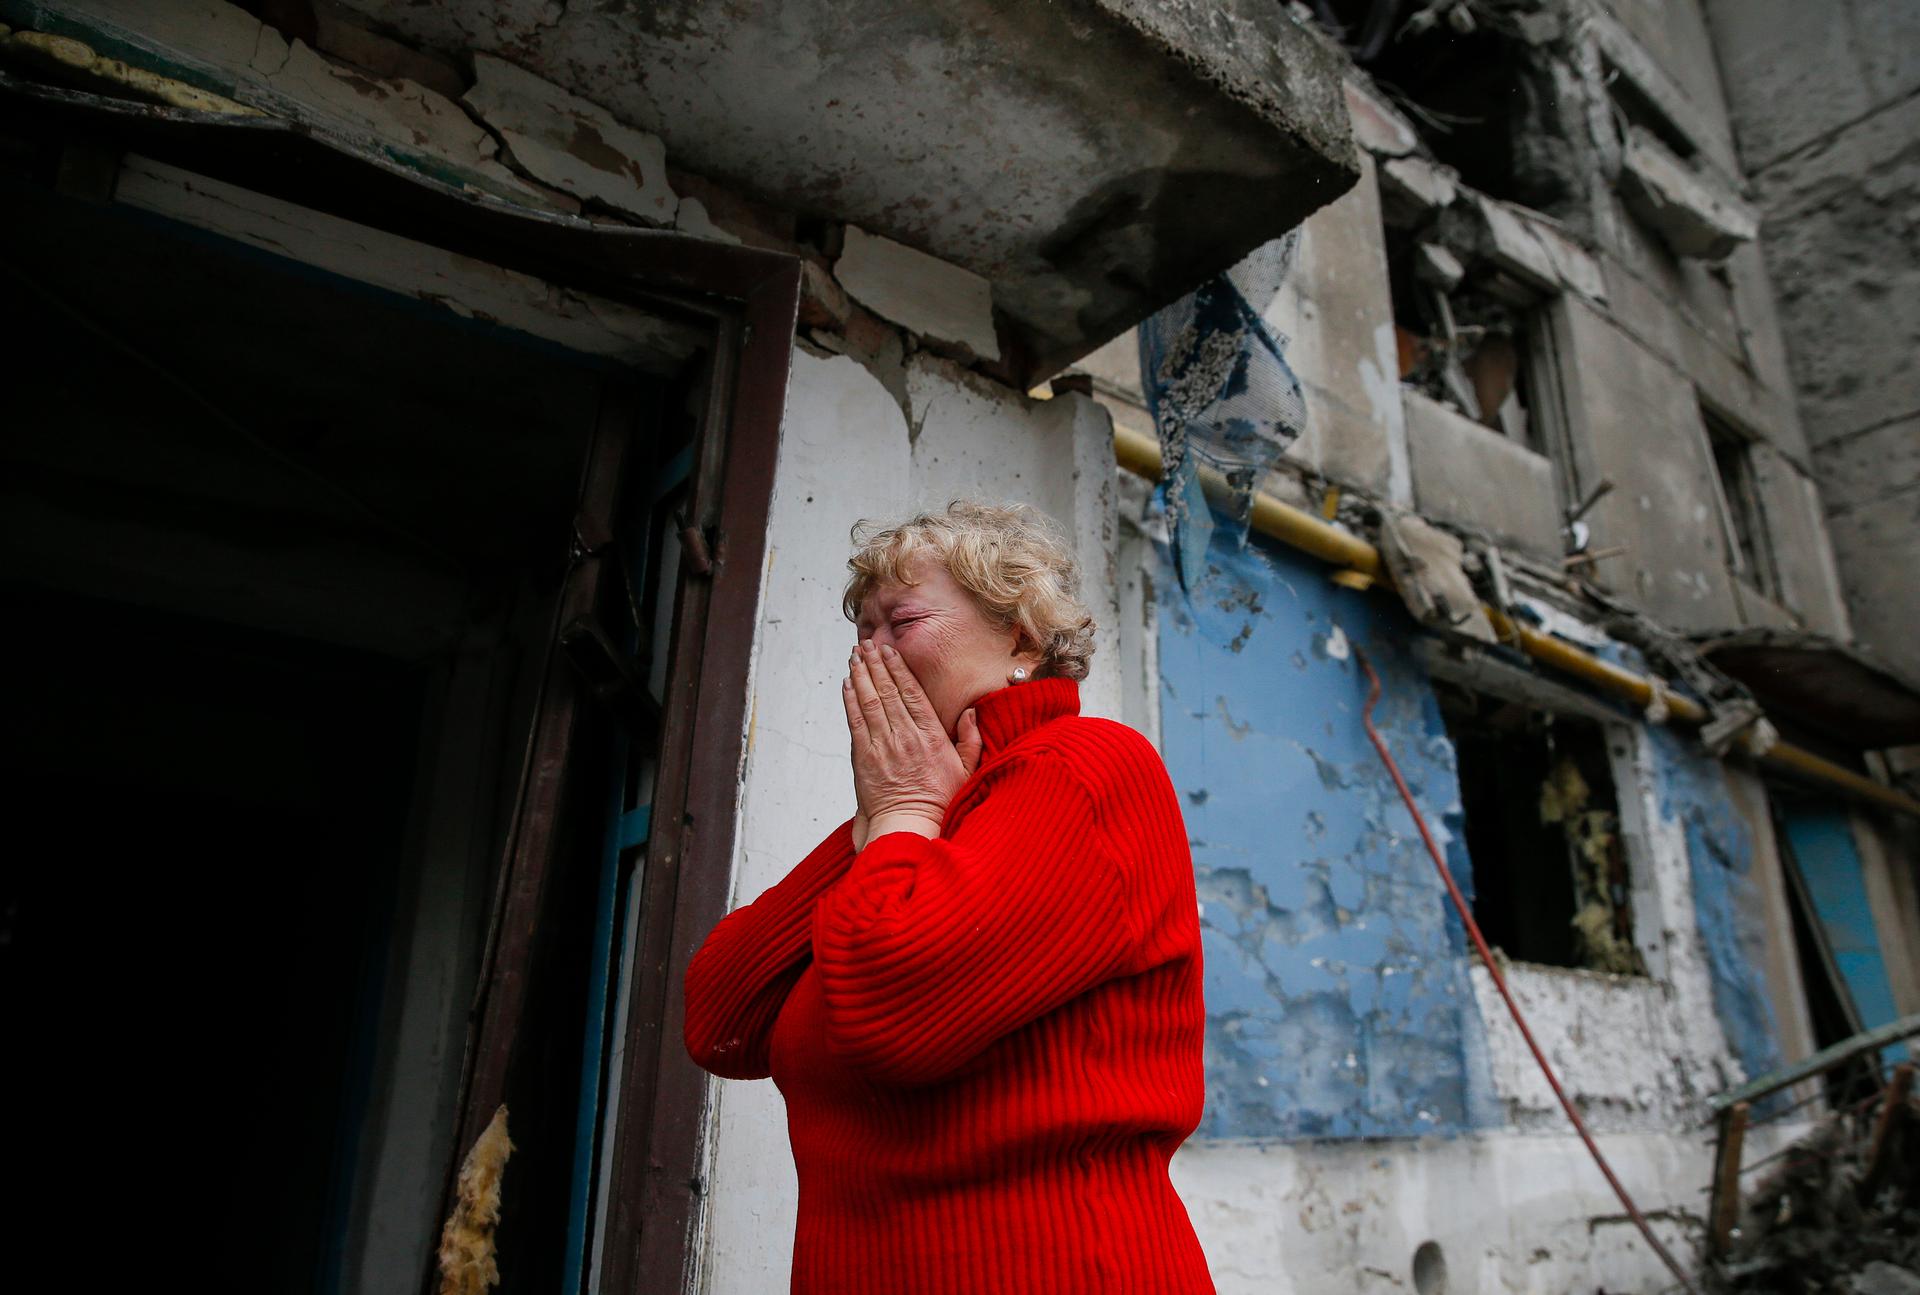 A woman takes stock of the damage to an apartment block, hit by shelling in a small town near Debaltseve, Ukraine on February 2, 2015.